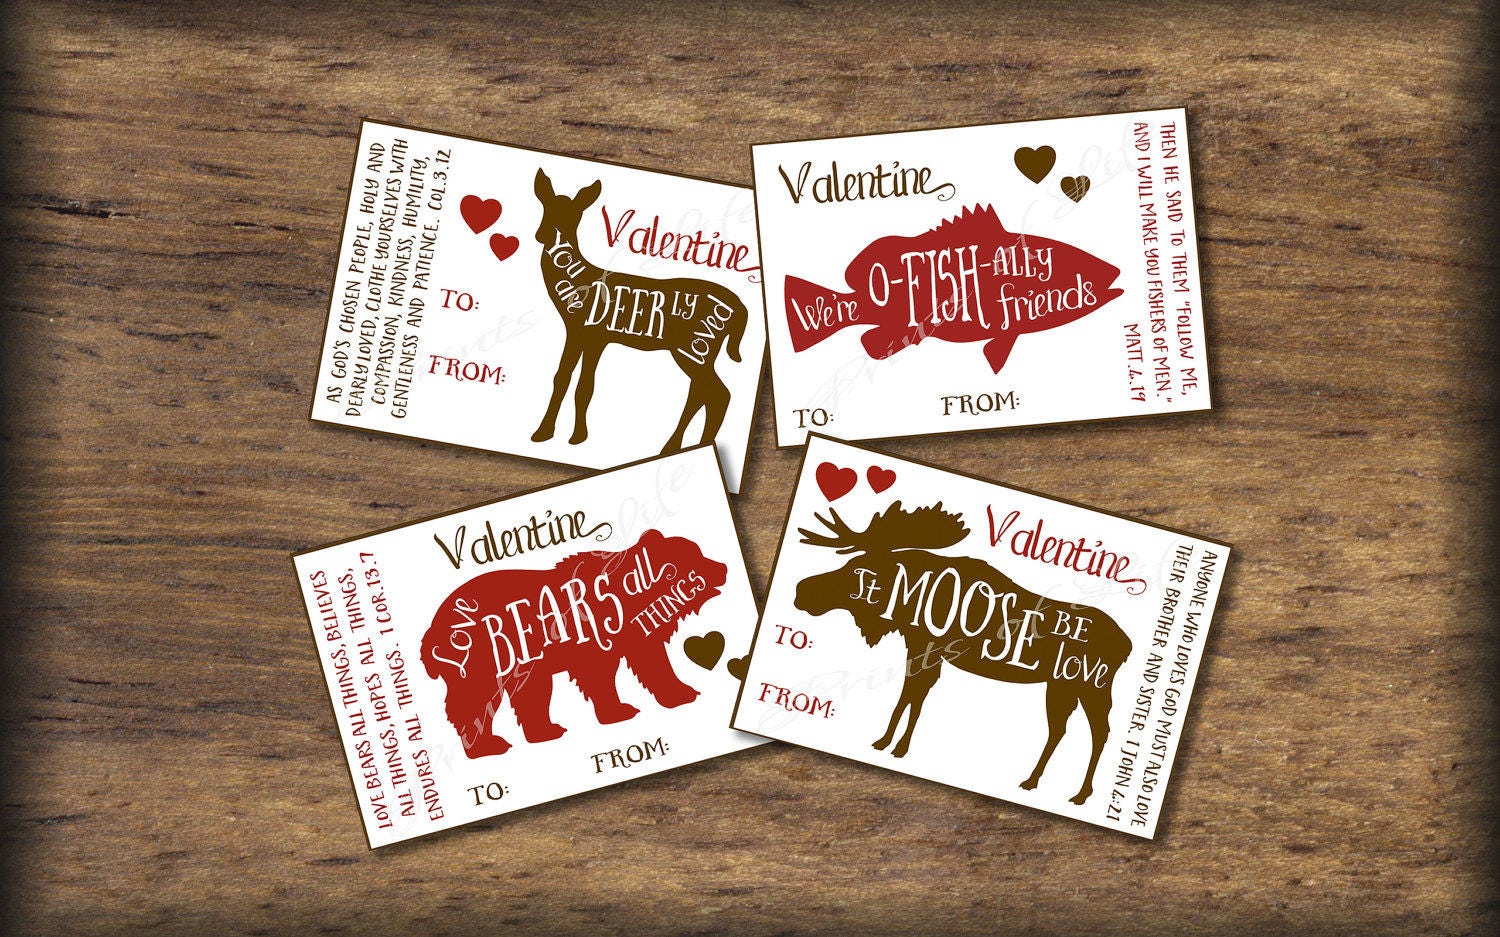 Five Senses Gift Tags & Card. 5 Senses Instant Download Printable. Perfect  Sense Print. Christmas Gift for Him Her. Valentines Day. Birthday 